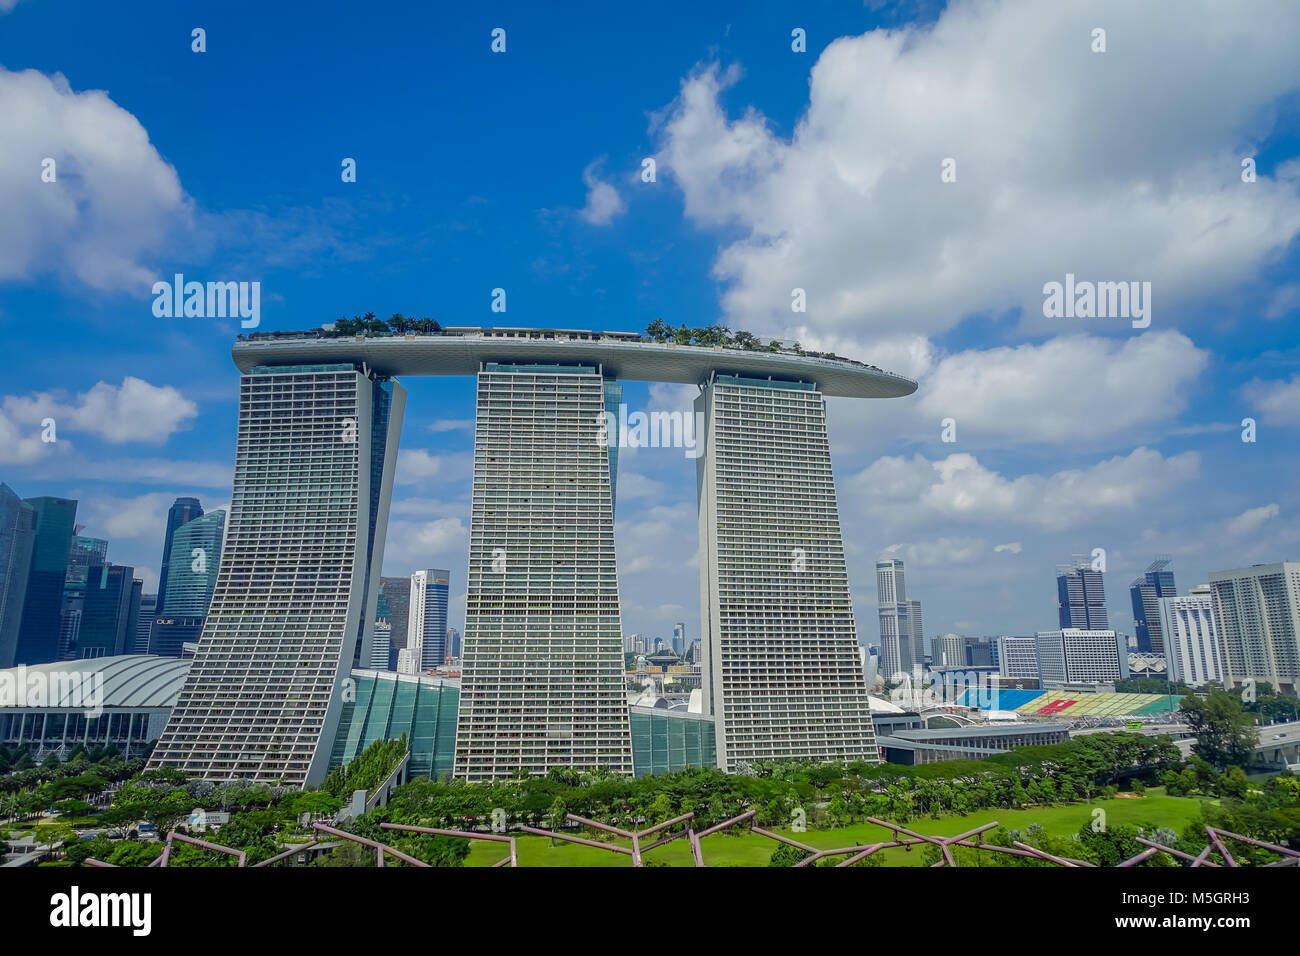 The Marina Bay Sands Building in Singapore against a blue sky